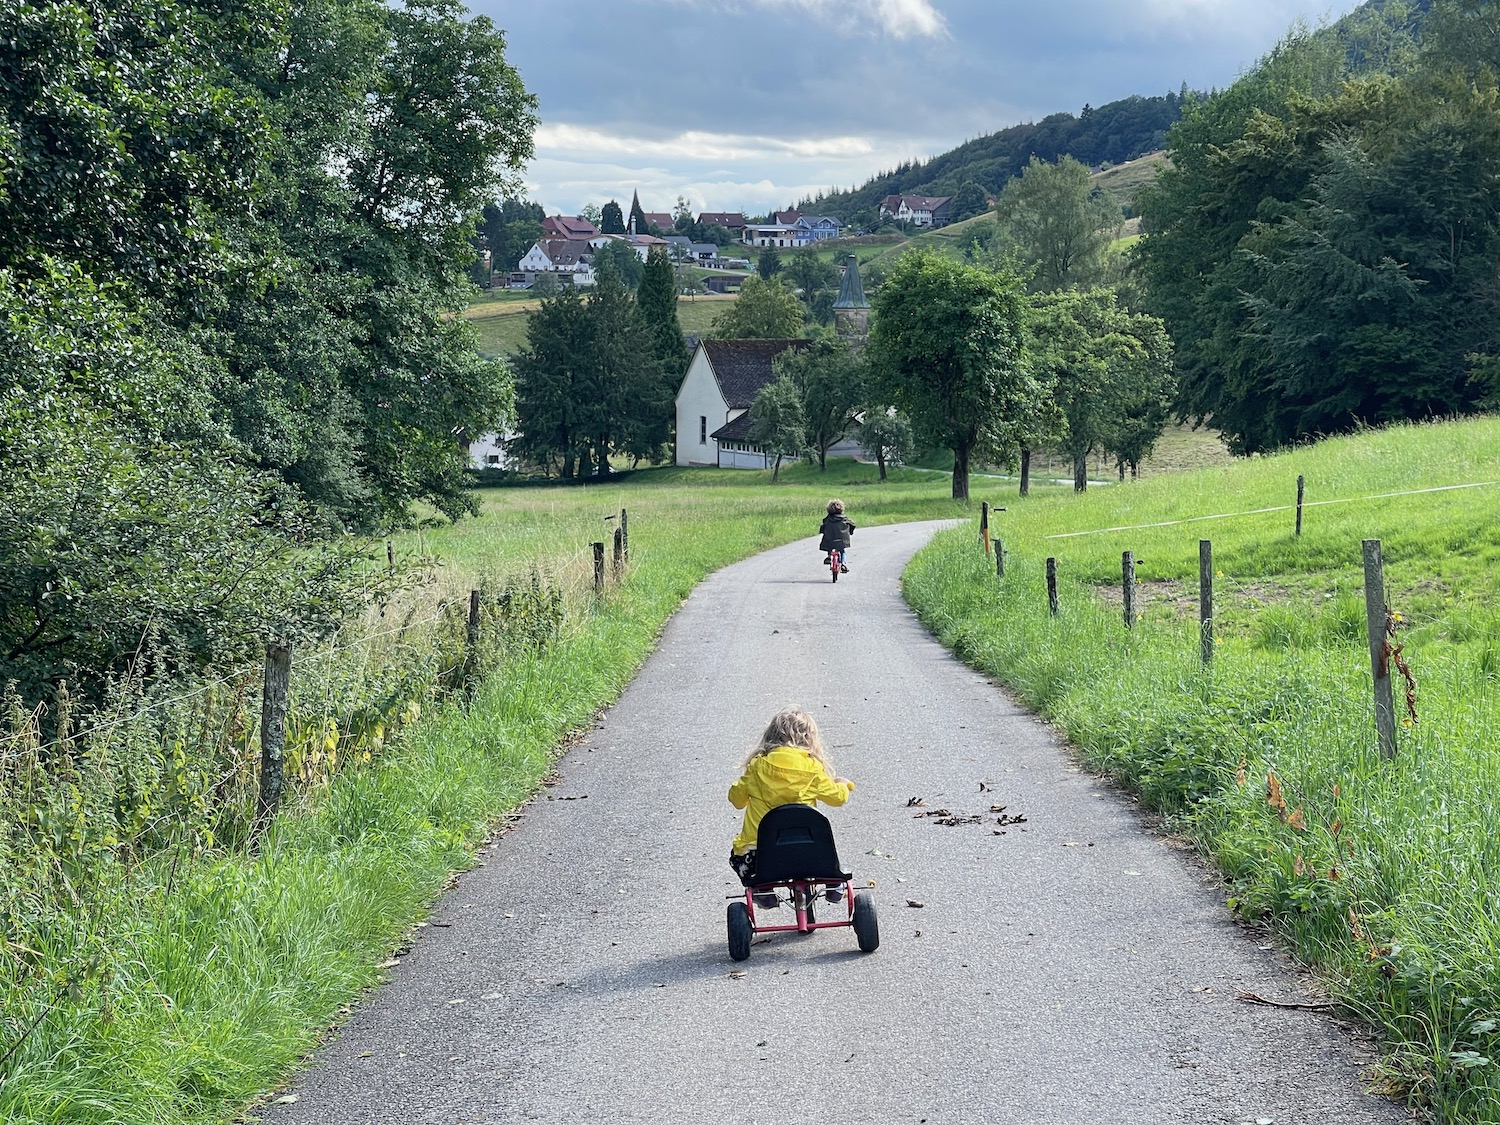 a child riding a tricycle on a path with a man riding a bike